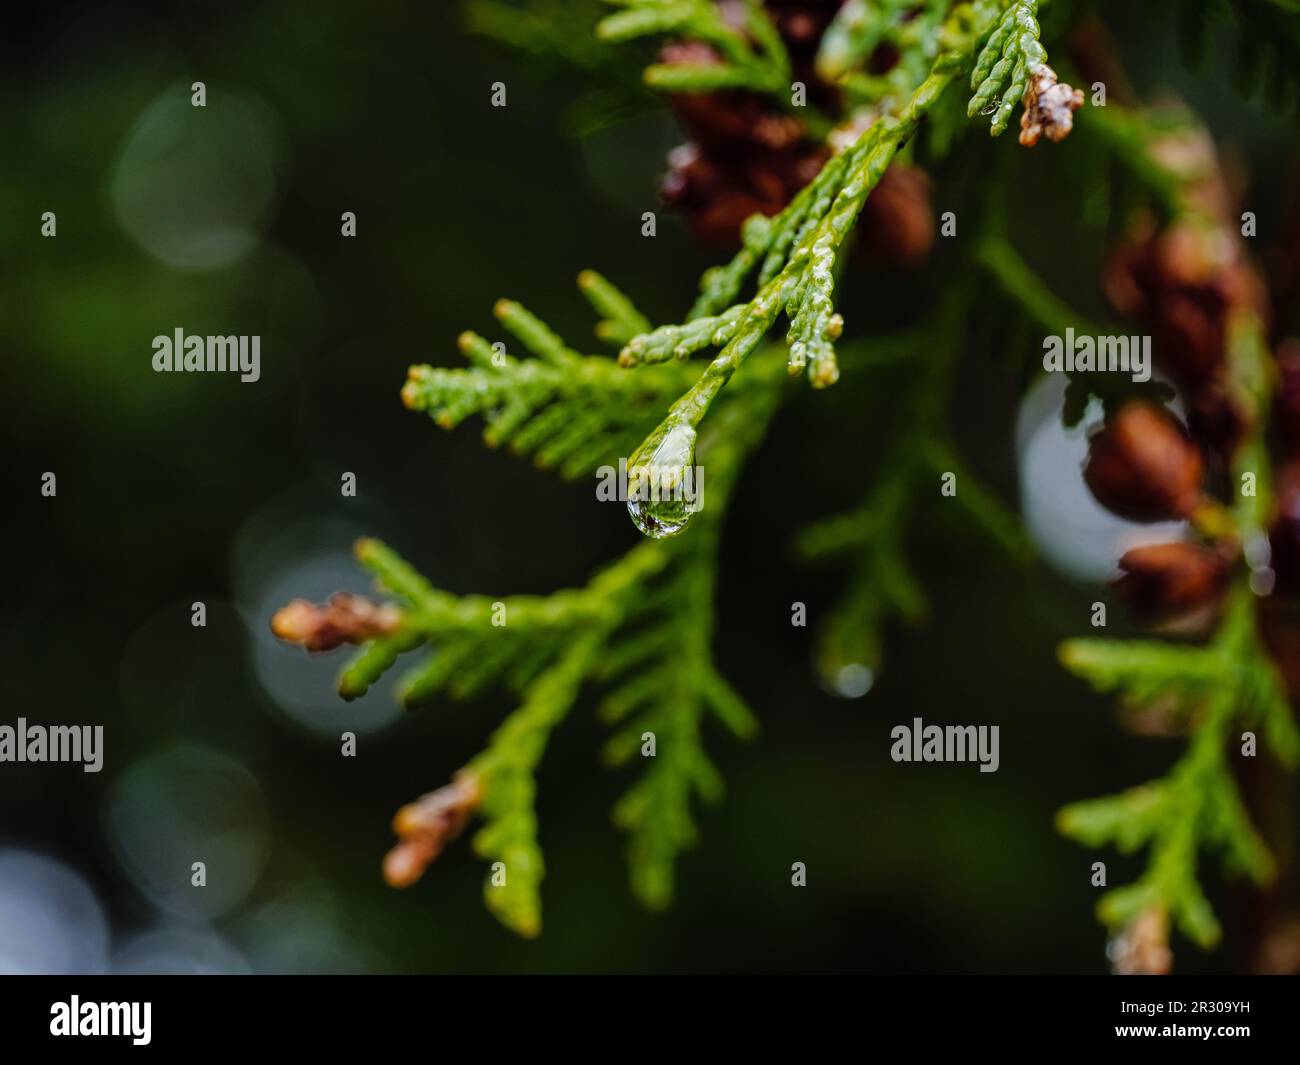 A drop of water after the rain on a sprig of thuja, with a blurred background Stock Photo